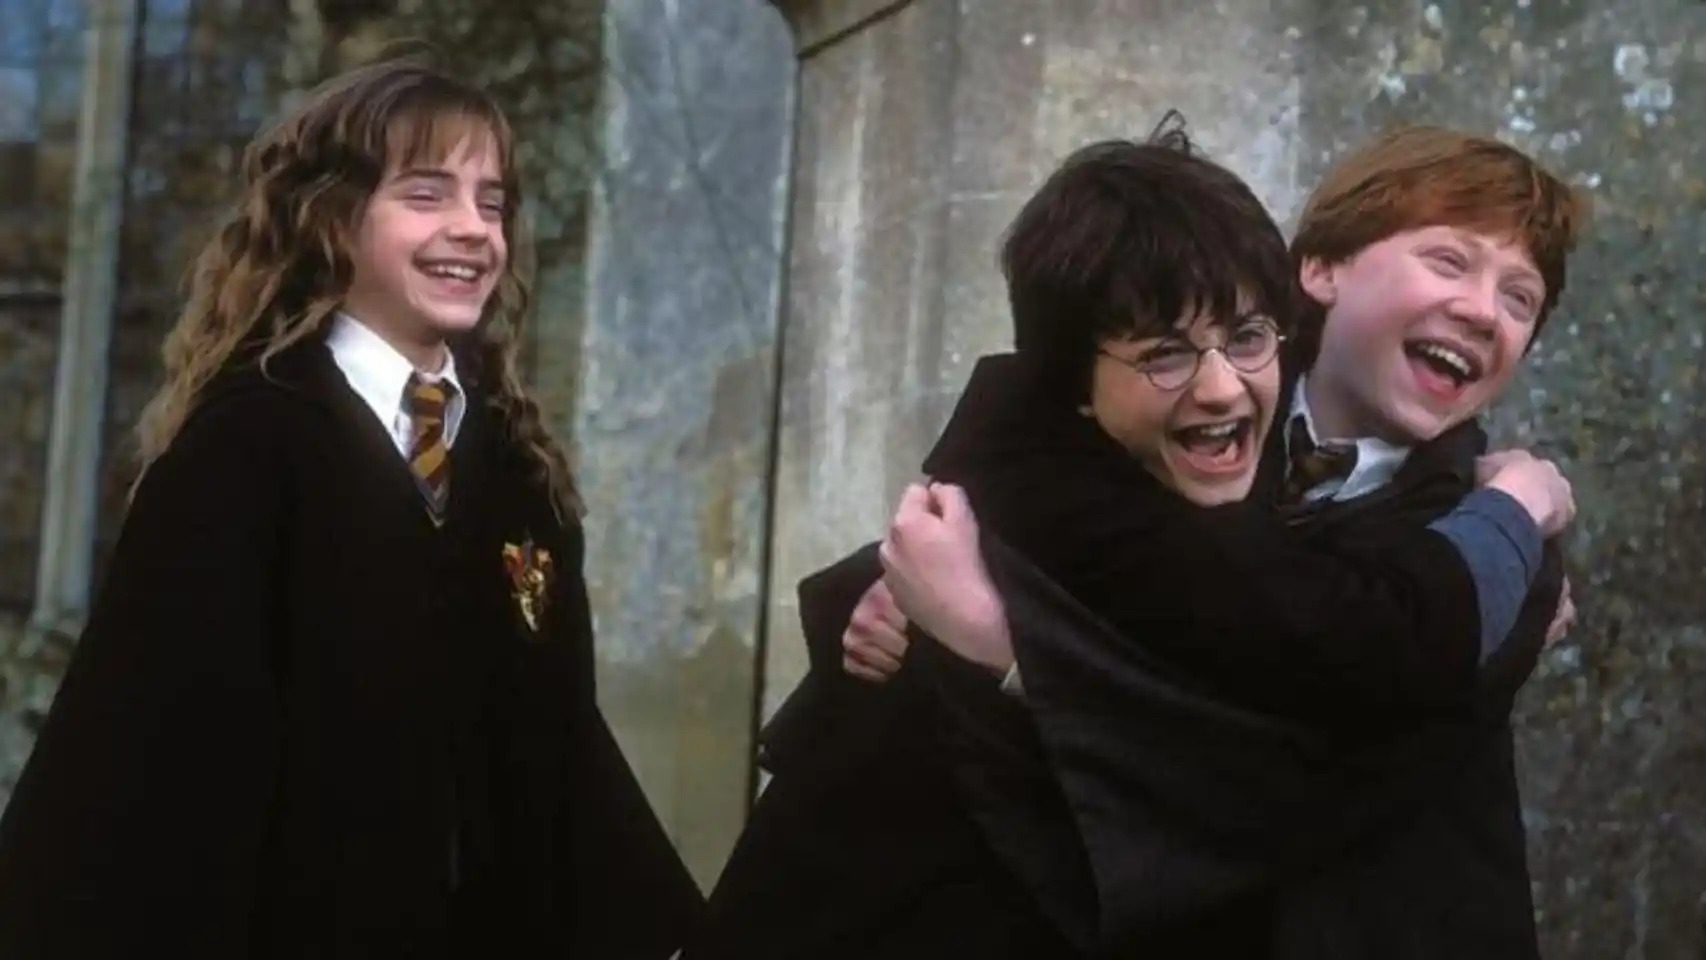 Harry potter series coming back